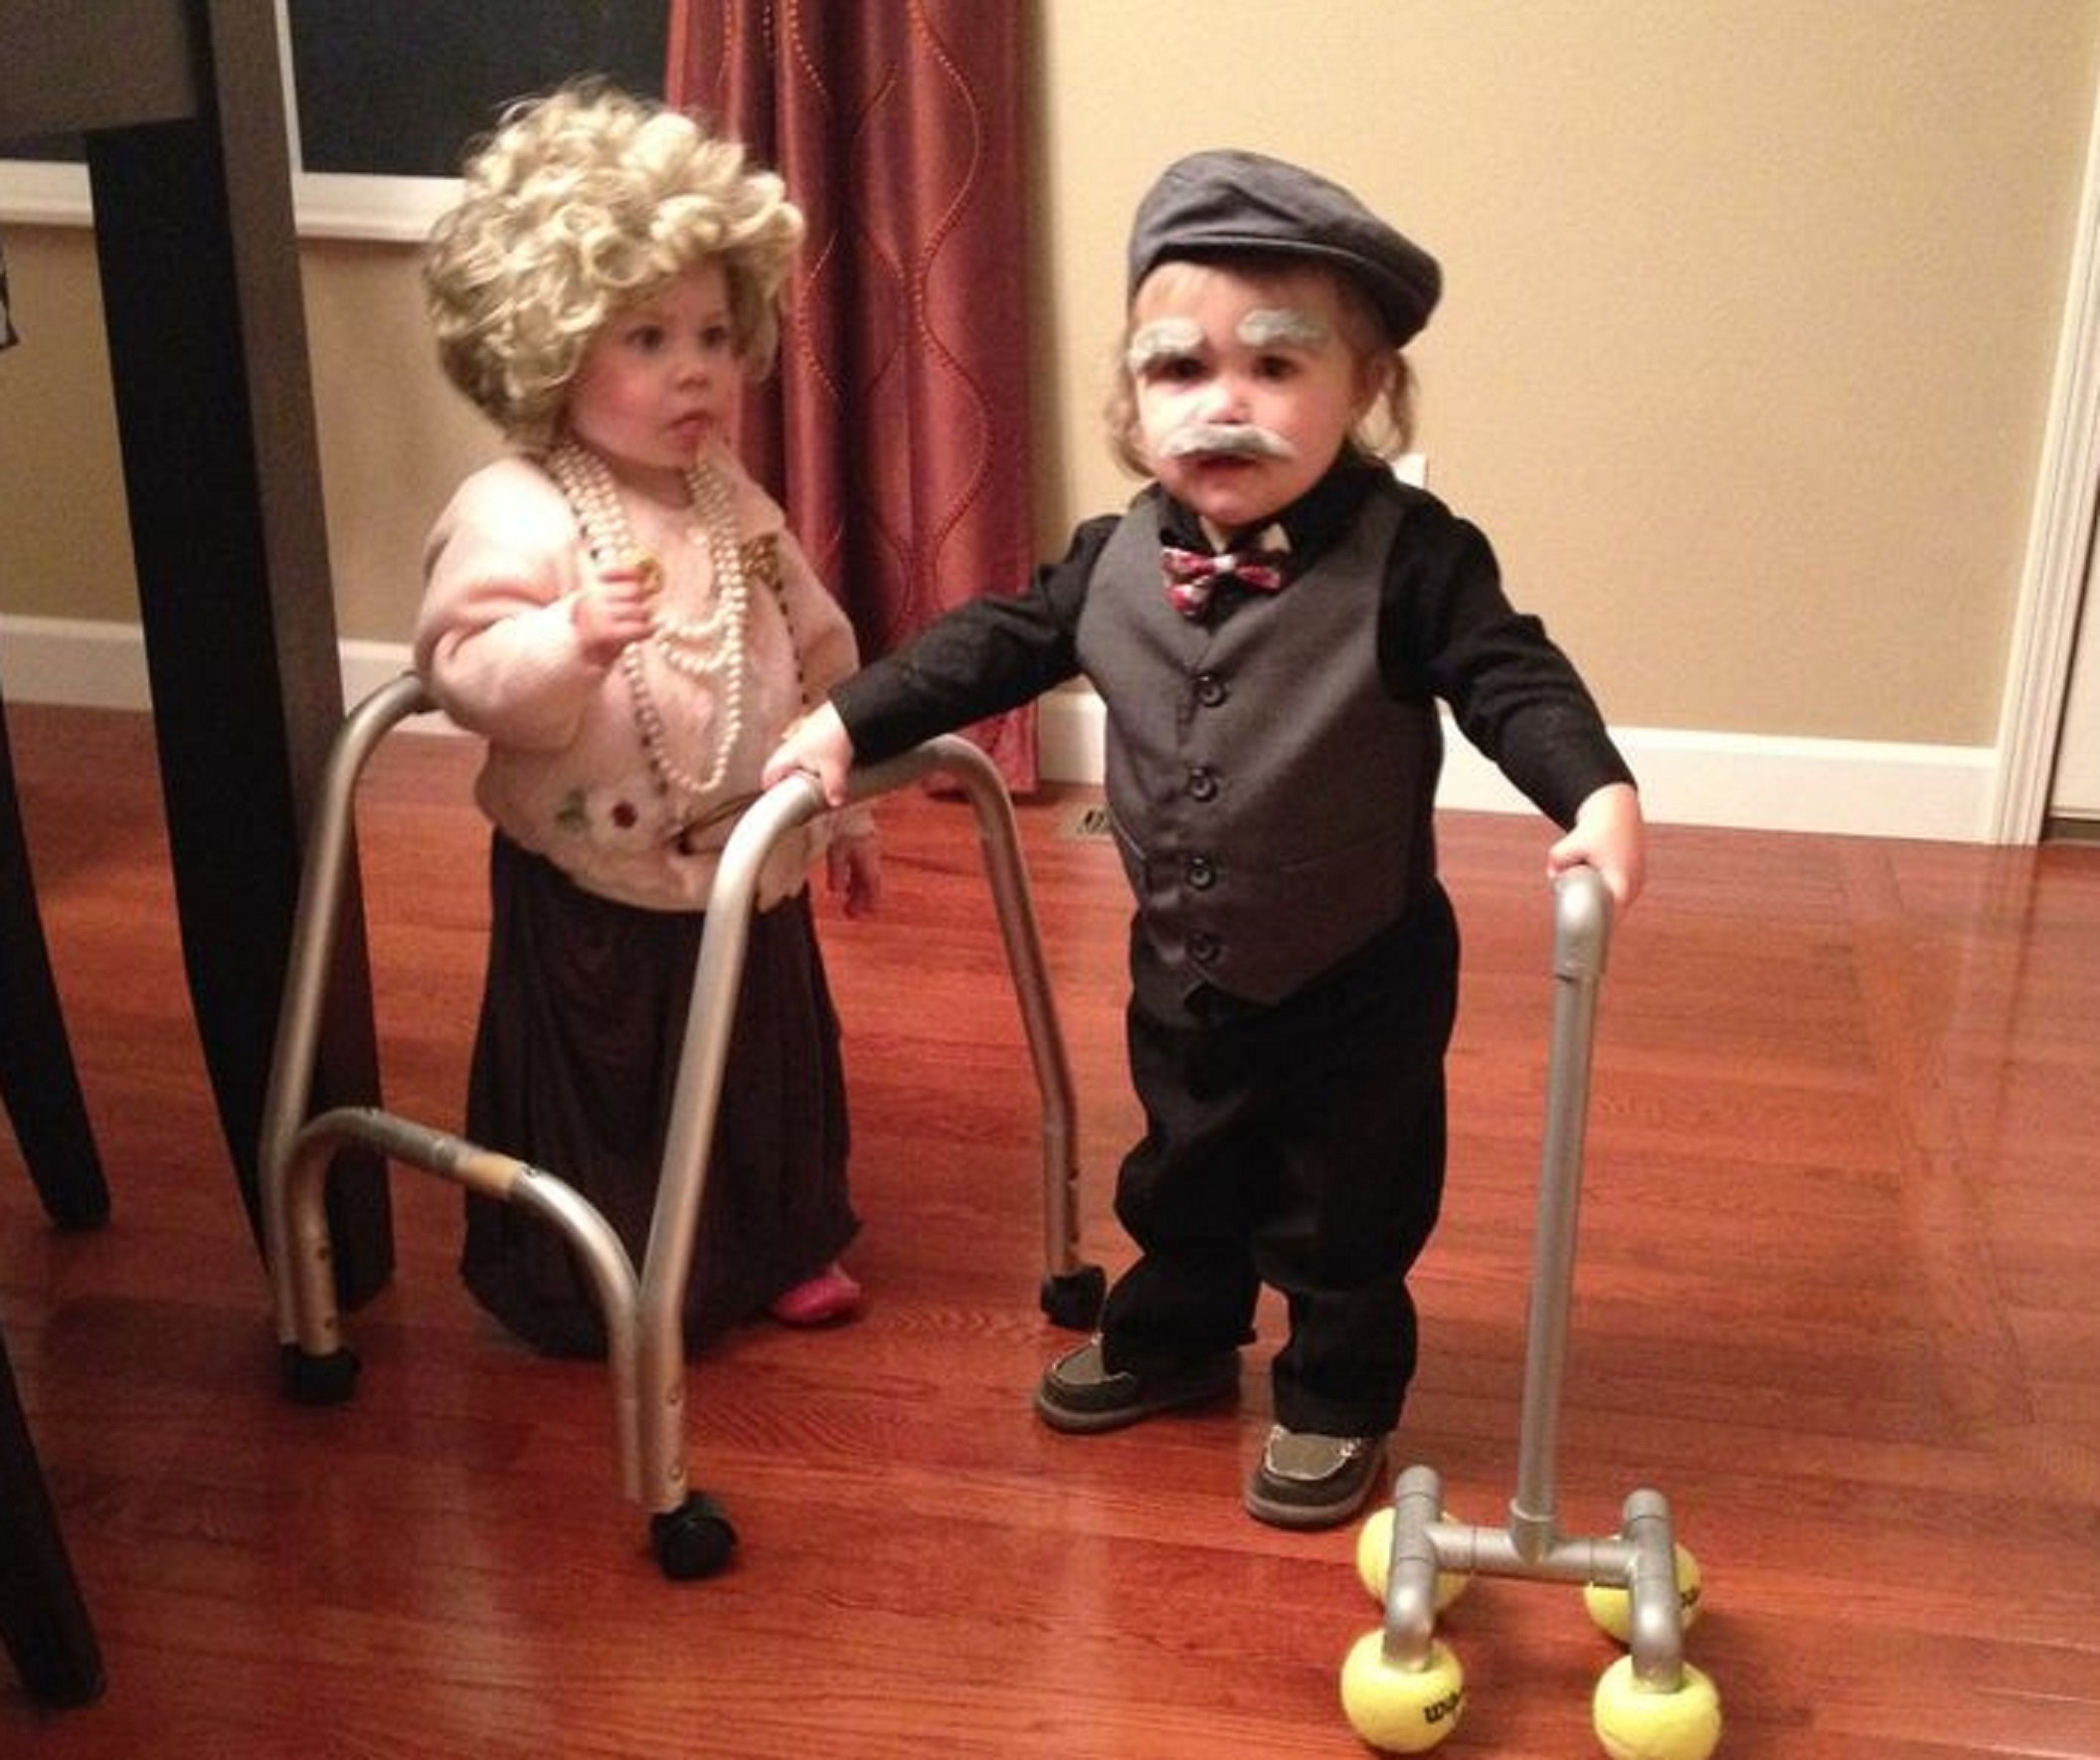 10 Most Popular His And Her Halloween Costume Ideas 2014 couples halloween costumes 2 2022